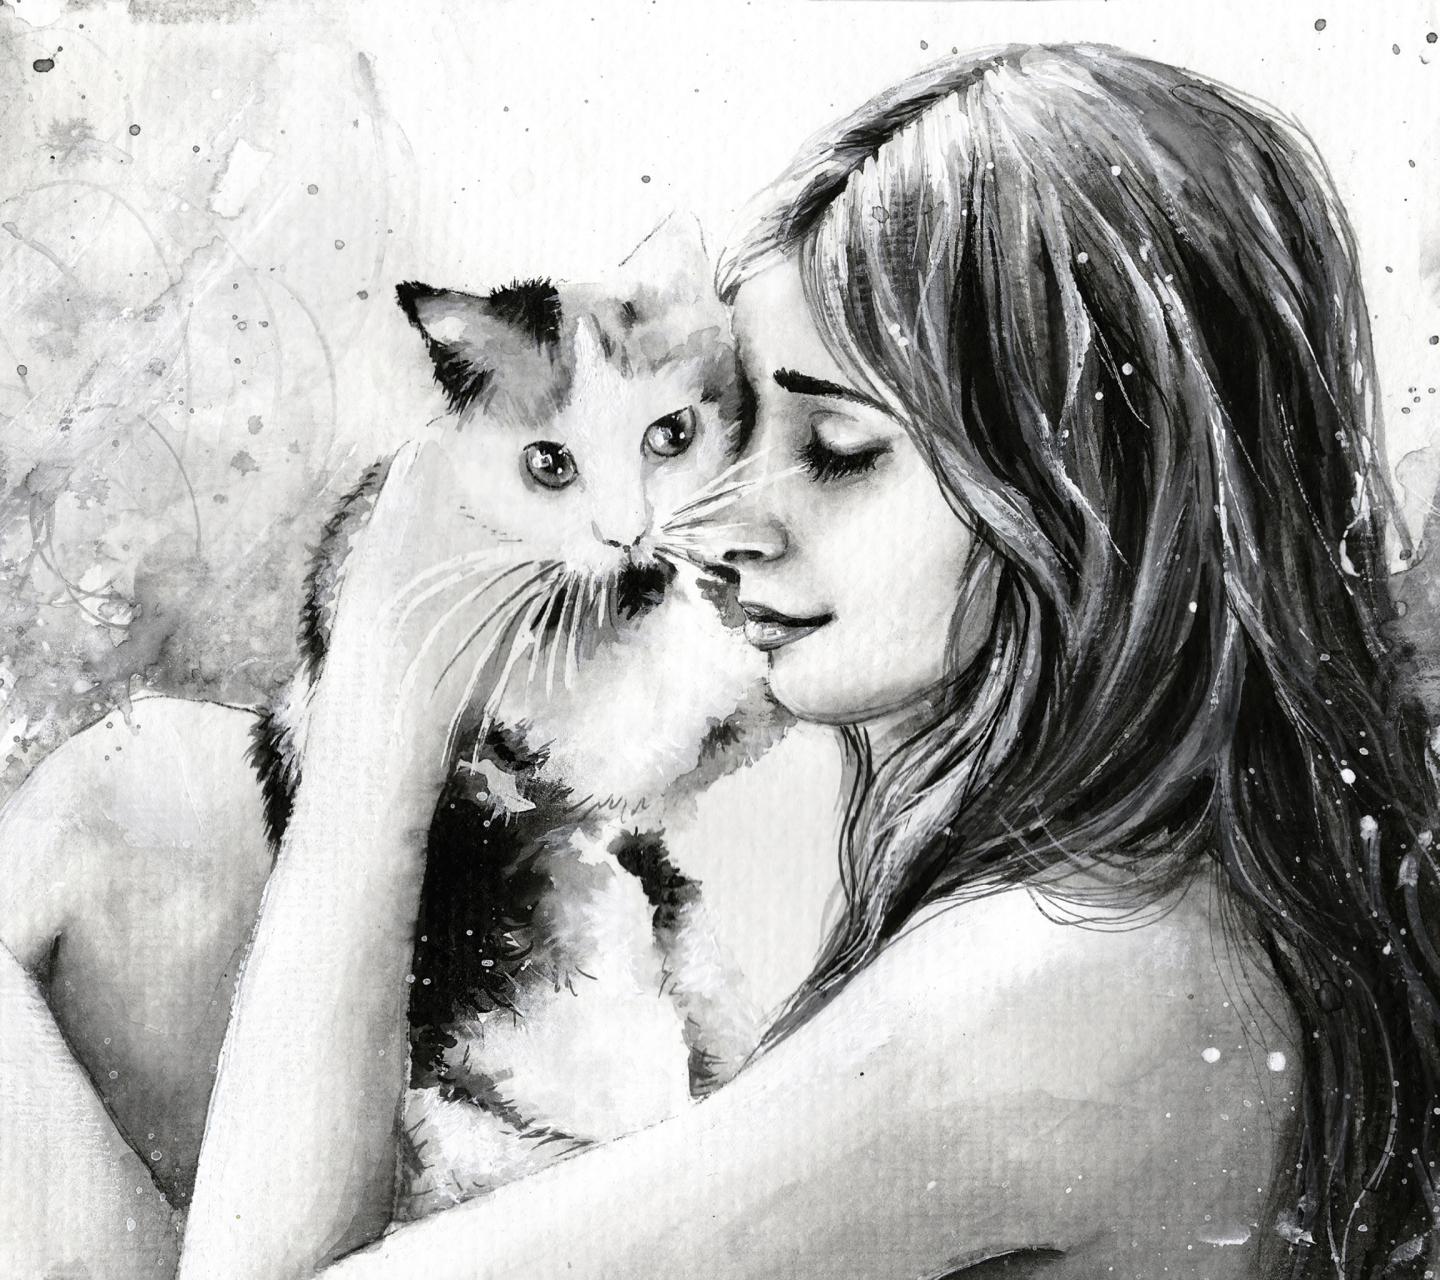 Girl With Cat Black And White Painting screenshot #1 1440x1280